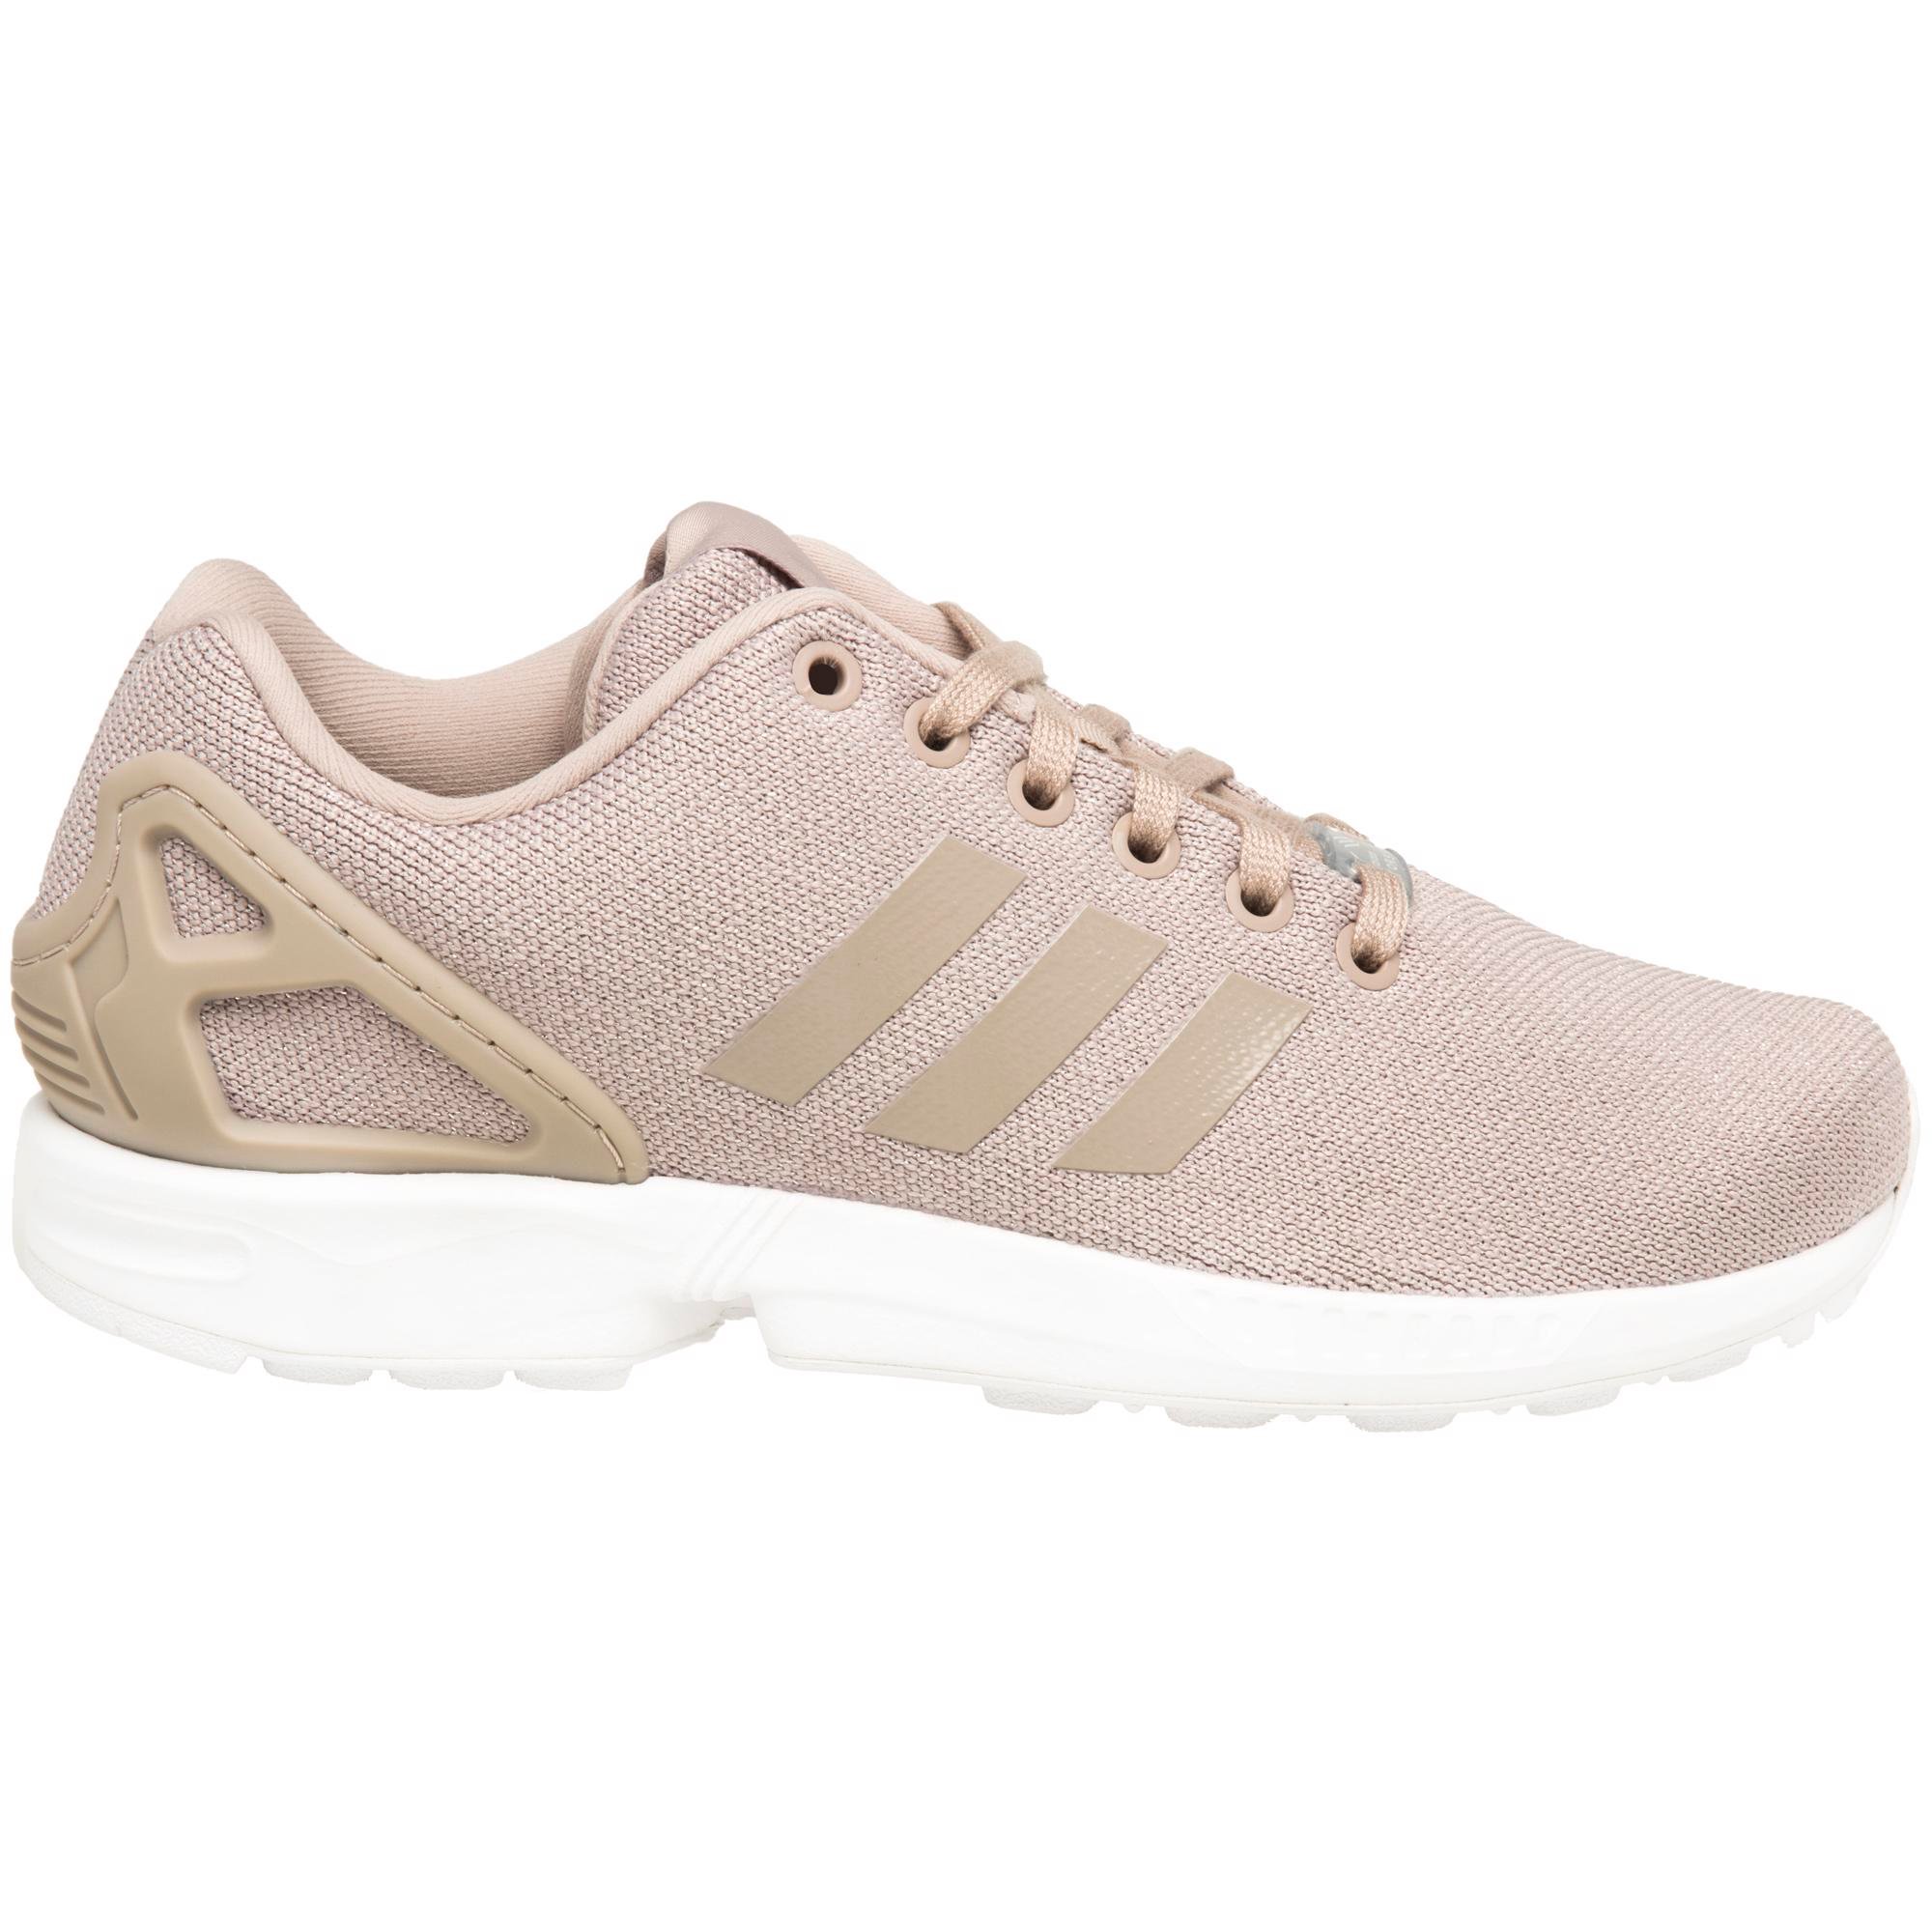 Tumba atractivo crisis Cheap Womens Grey Adidas Zx Flux Trainers | Soletrader Outlet